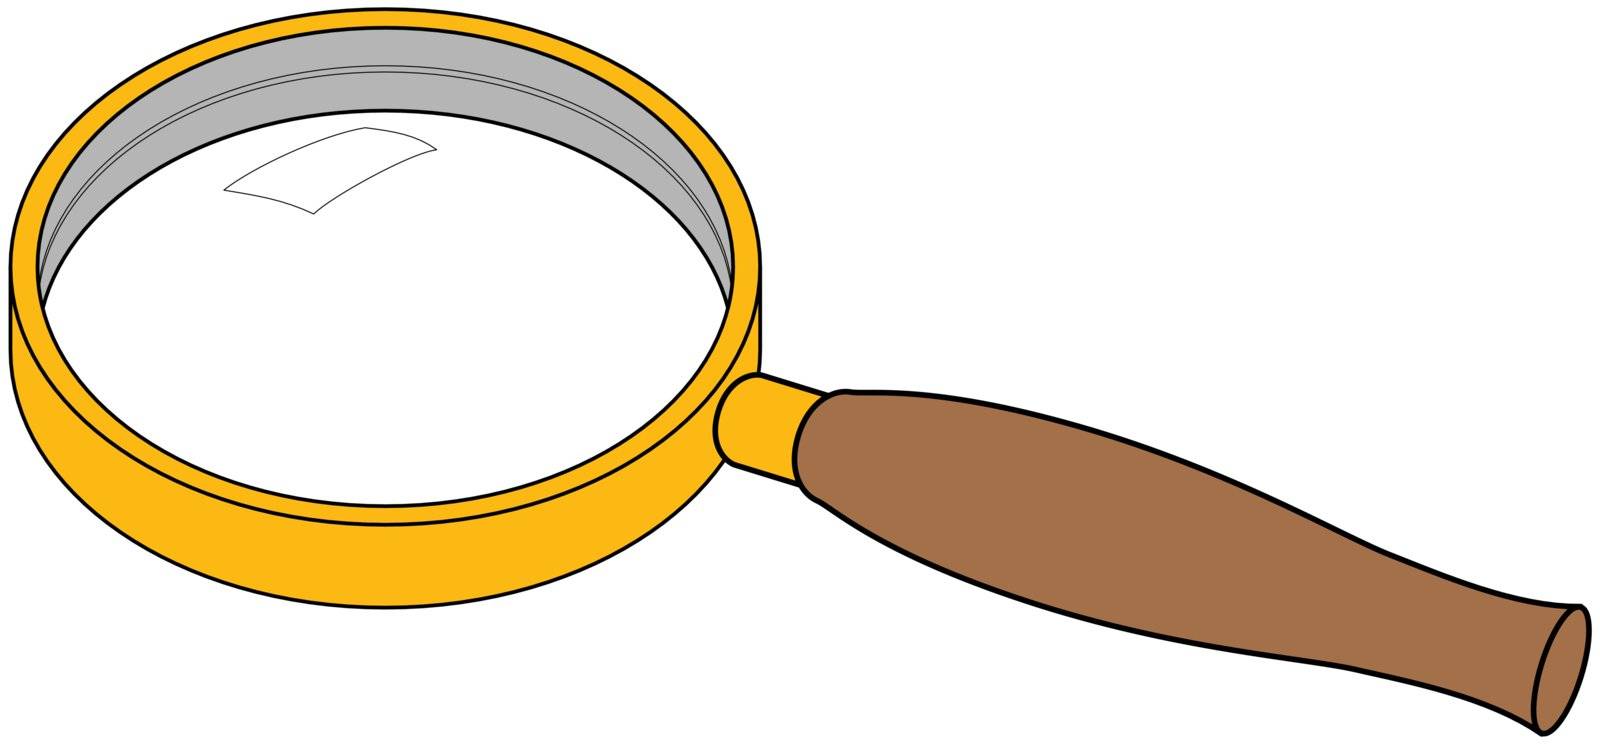 magnifying glass by yurka